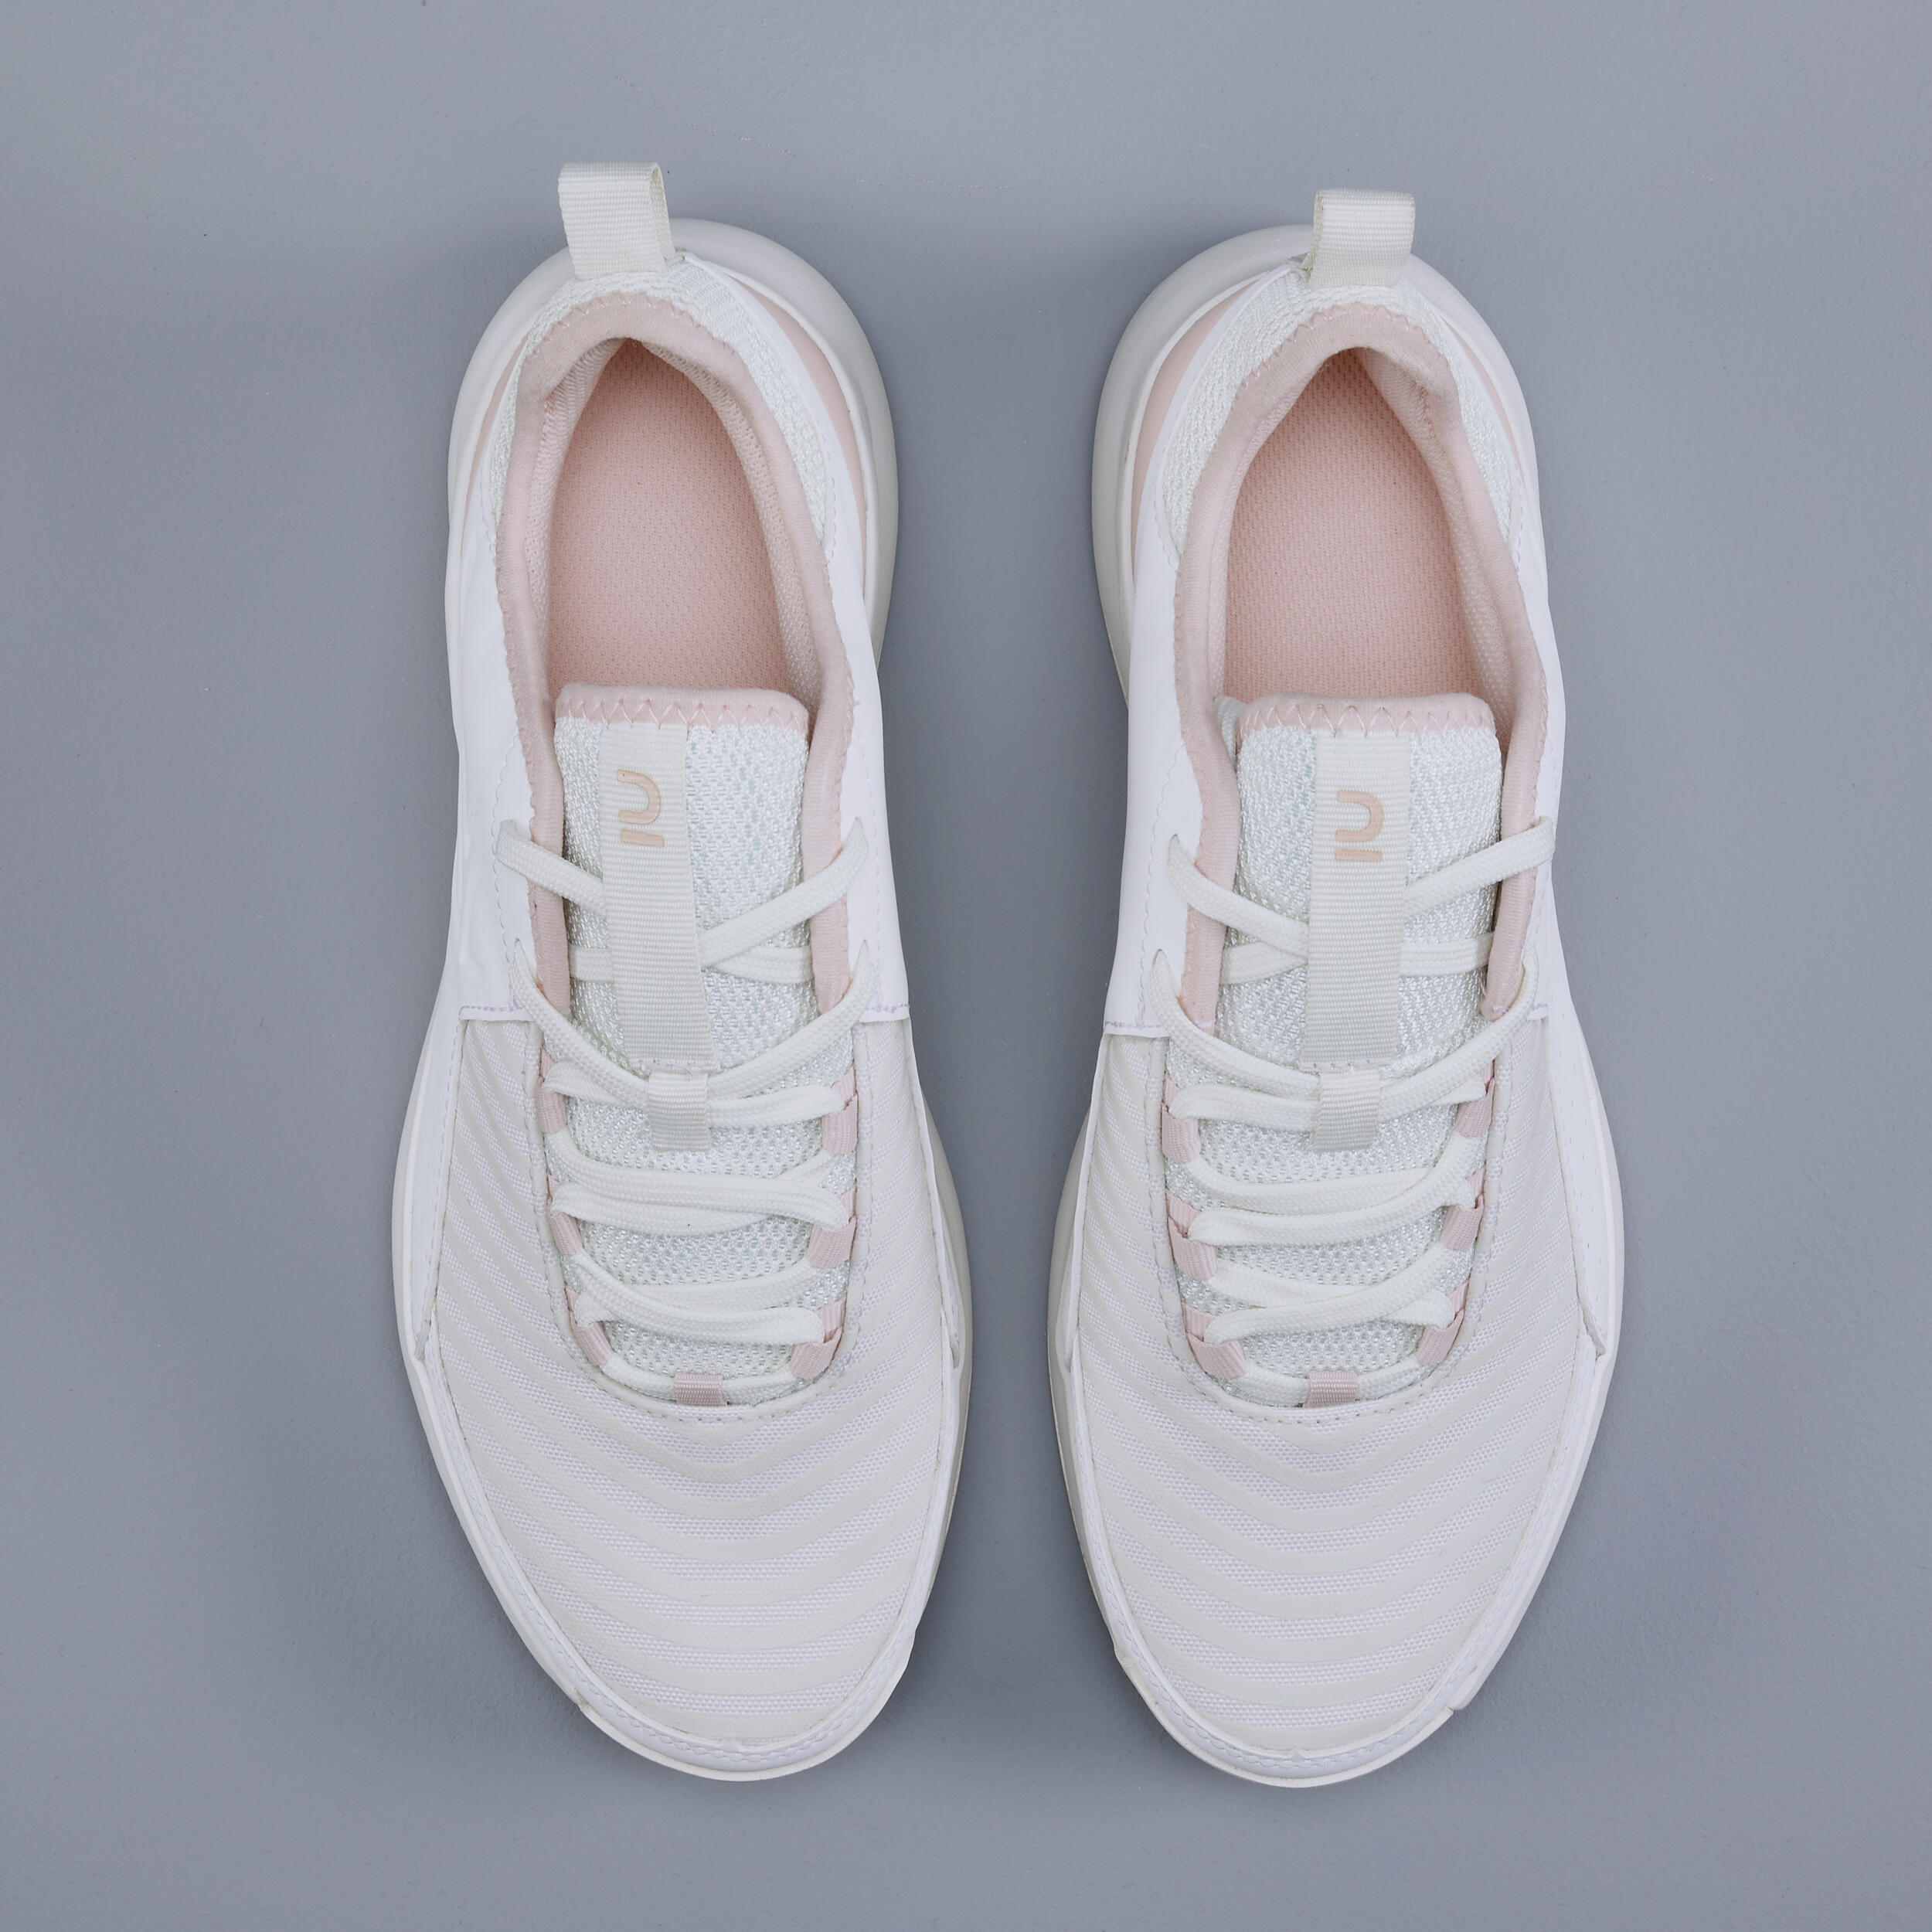 Women's Tennis Shoes TS 130 - Off-White/Pink 6/6